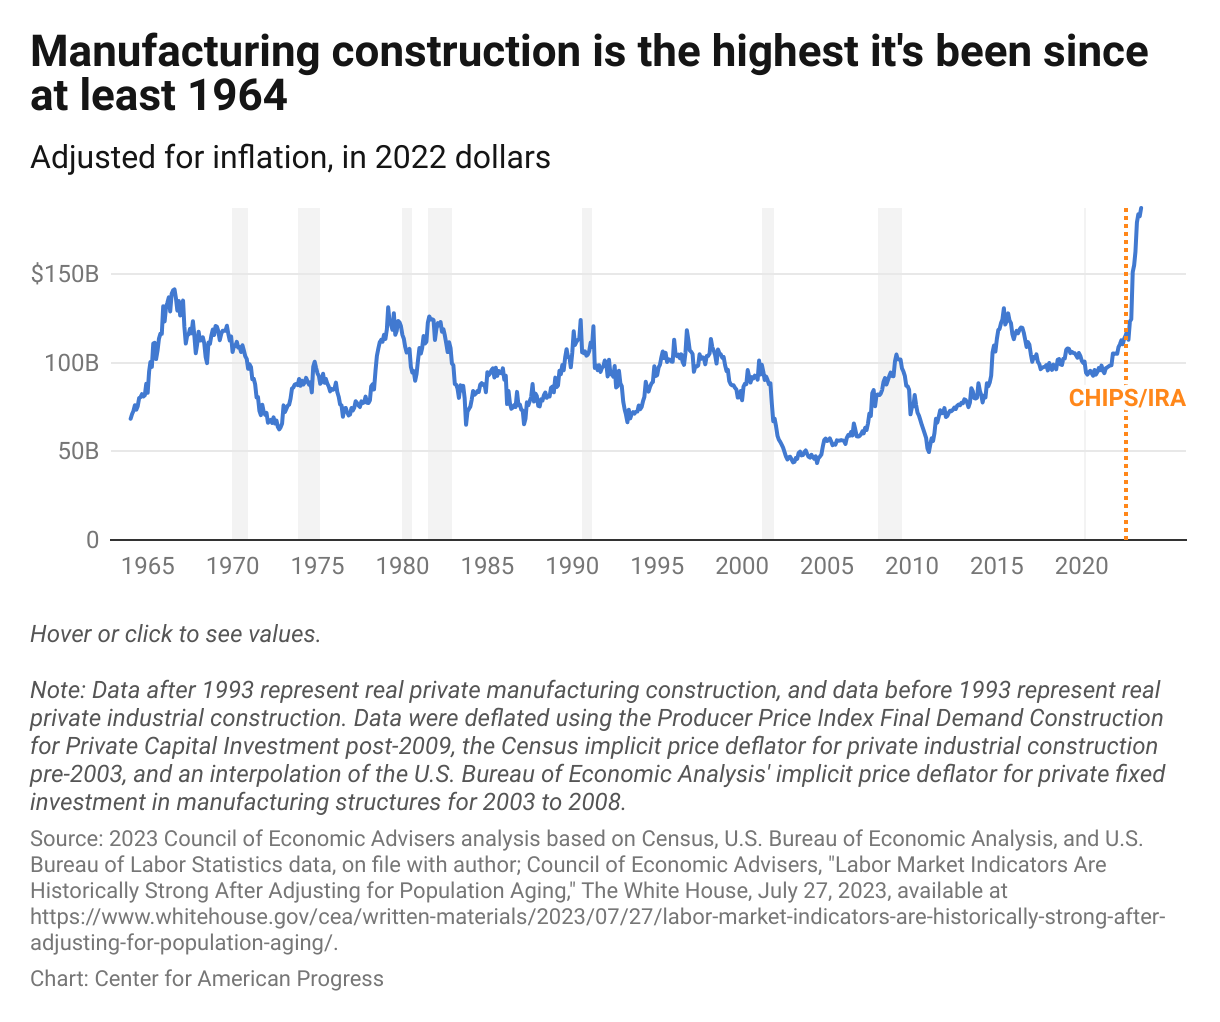 Graph showing that real manufacturing and industrial construction levels dramatically rose after the passage of the CHIPS and Science Act and the Inflation Reduction Act in 2022.